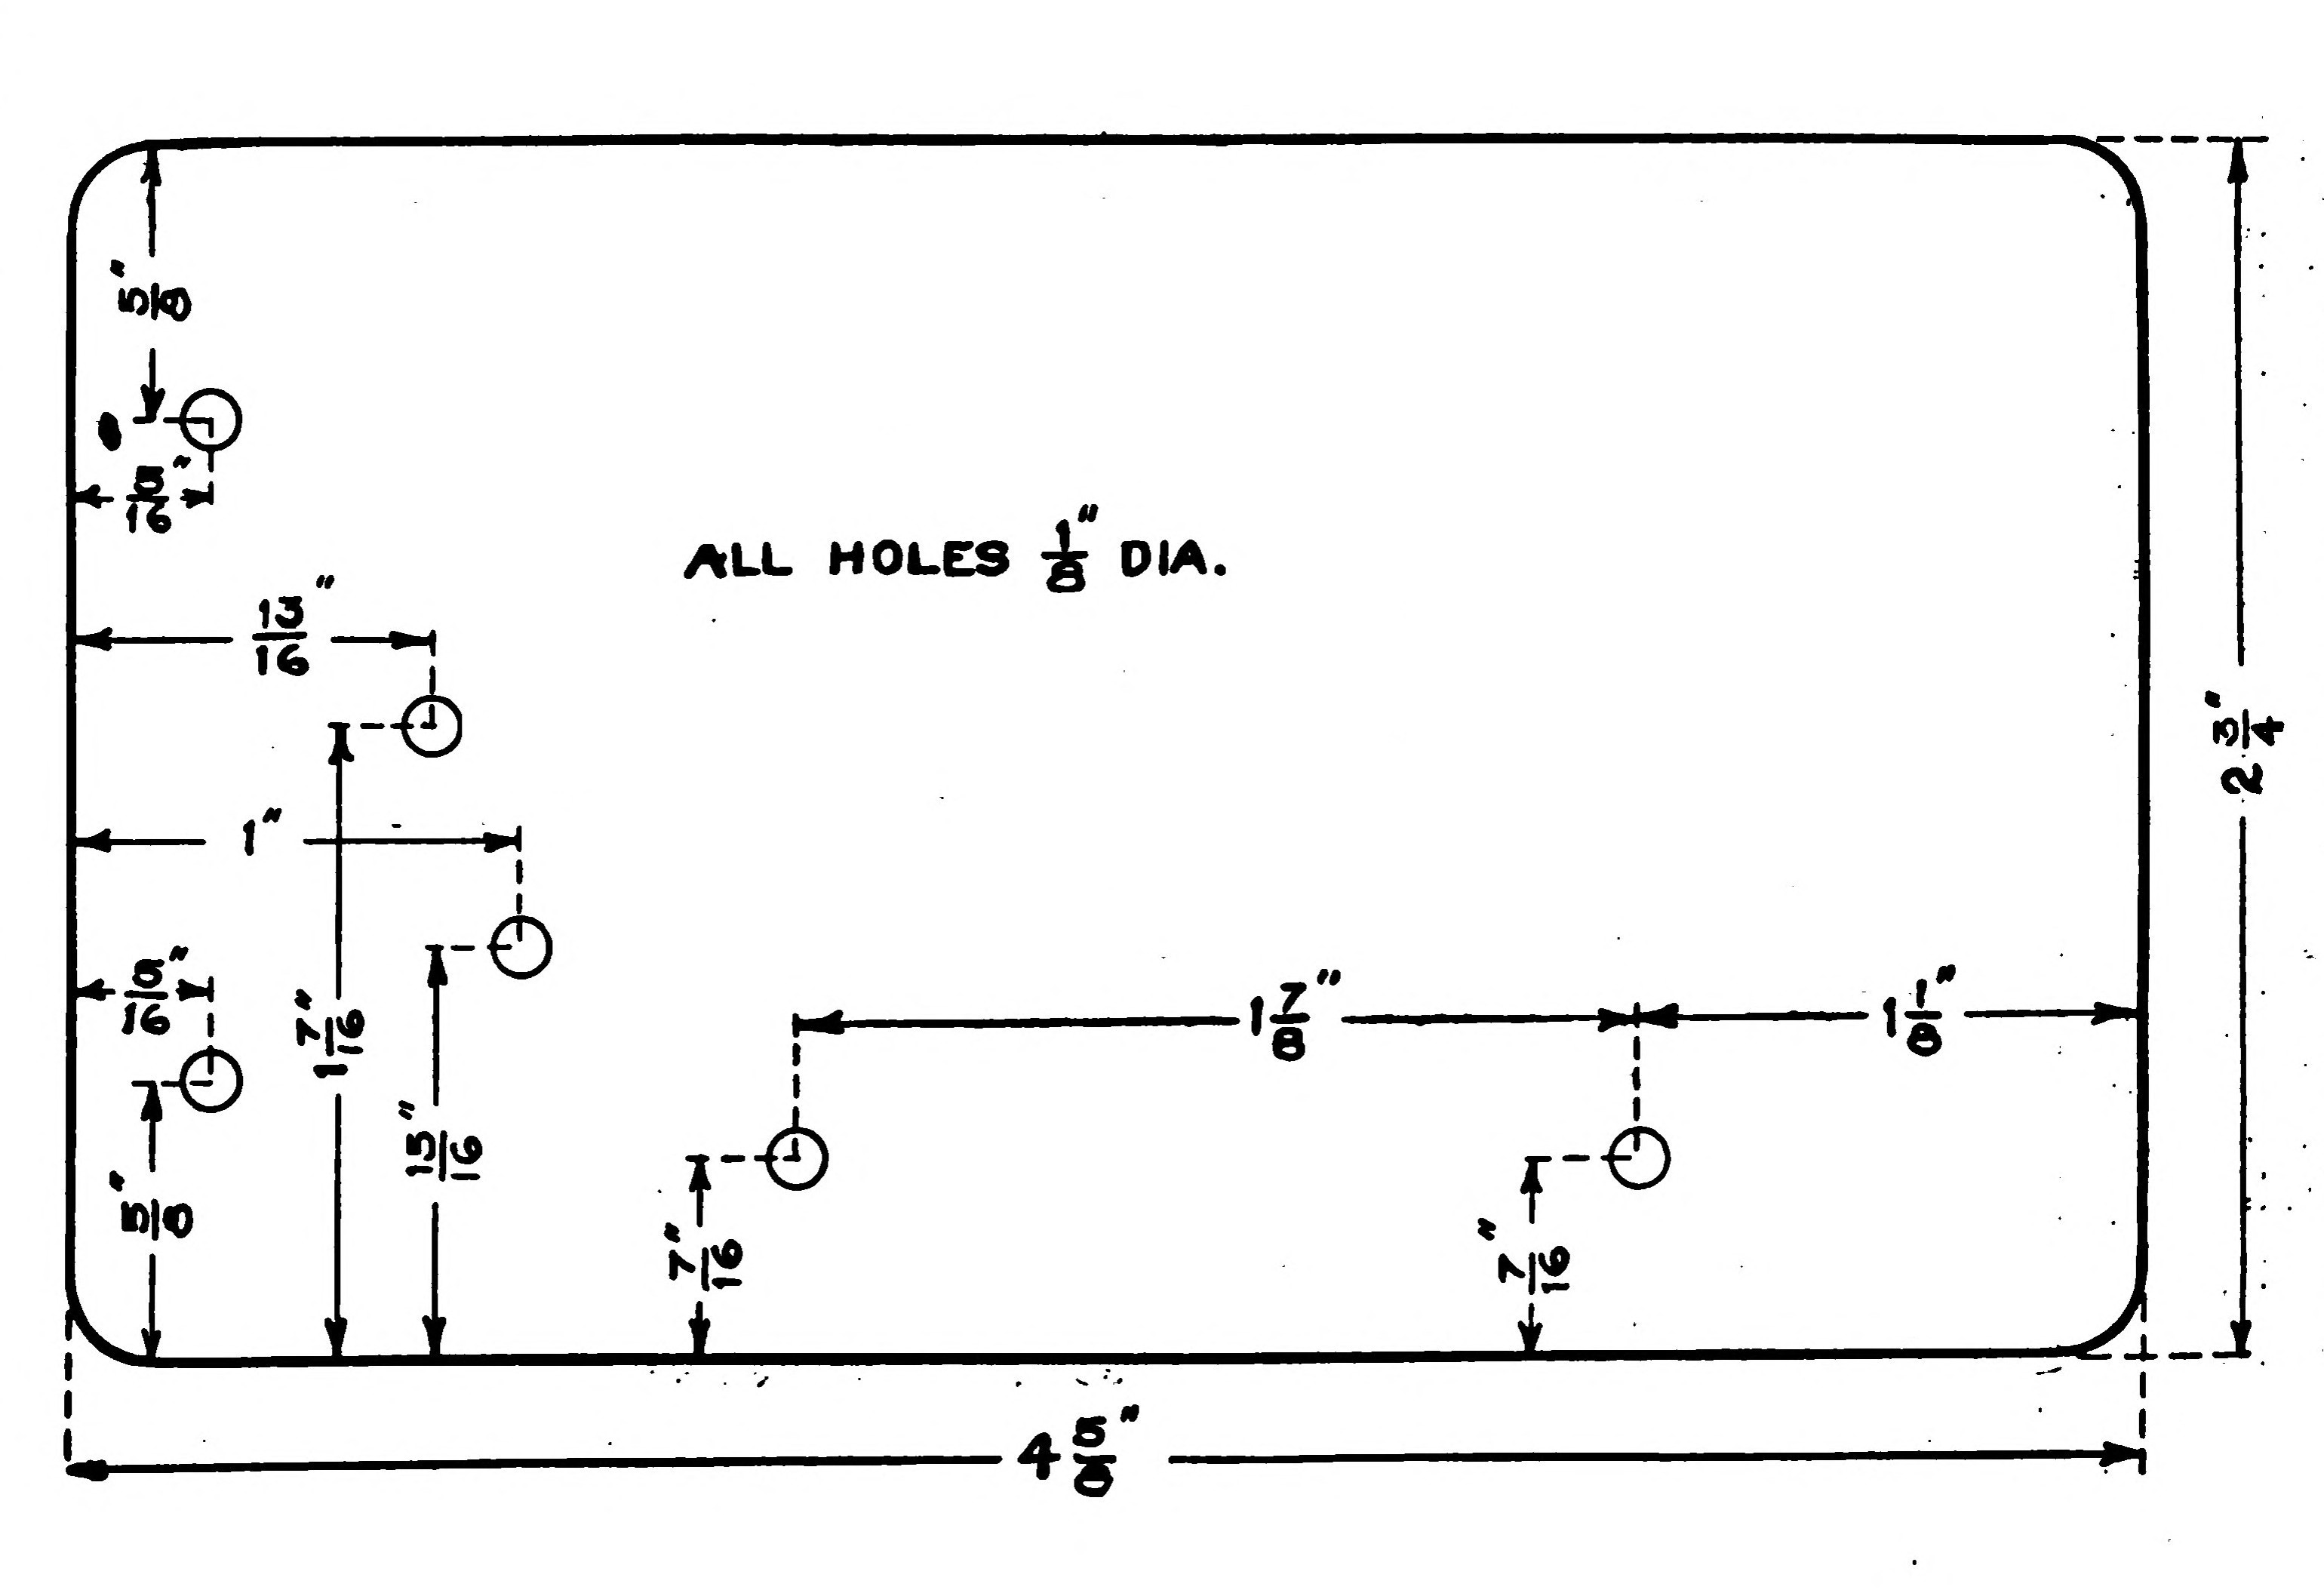 FIG. 103.—The Base with Location of Holes.